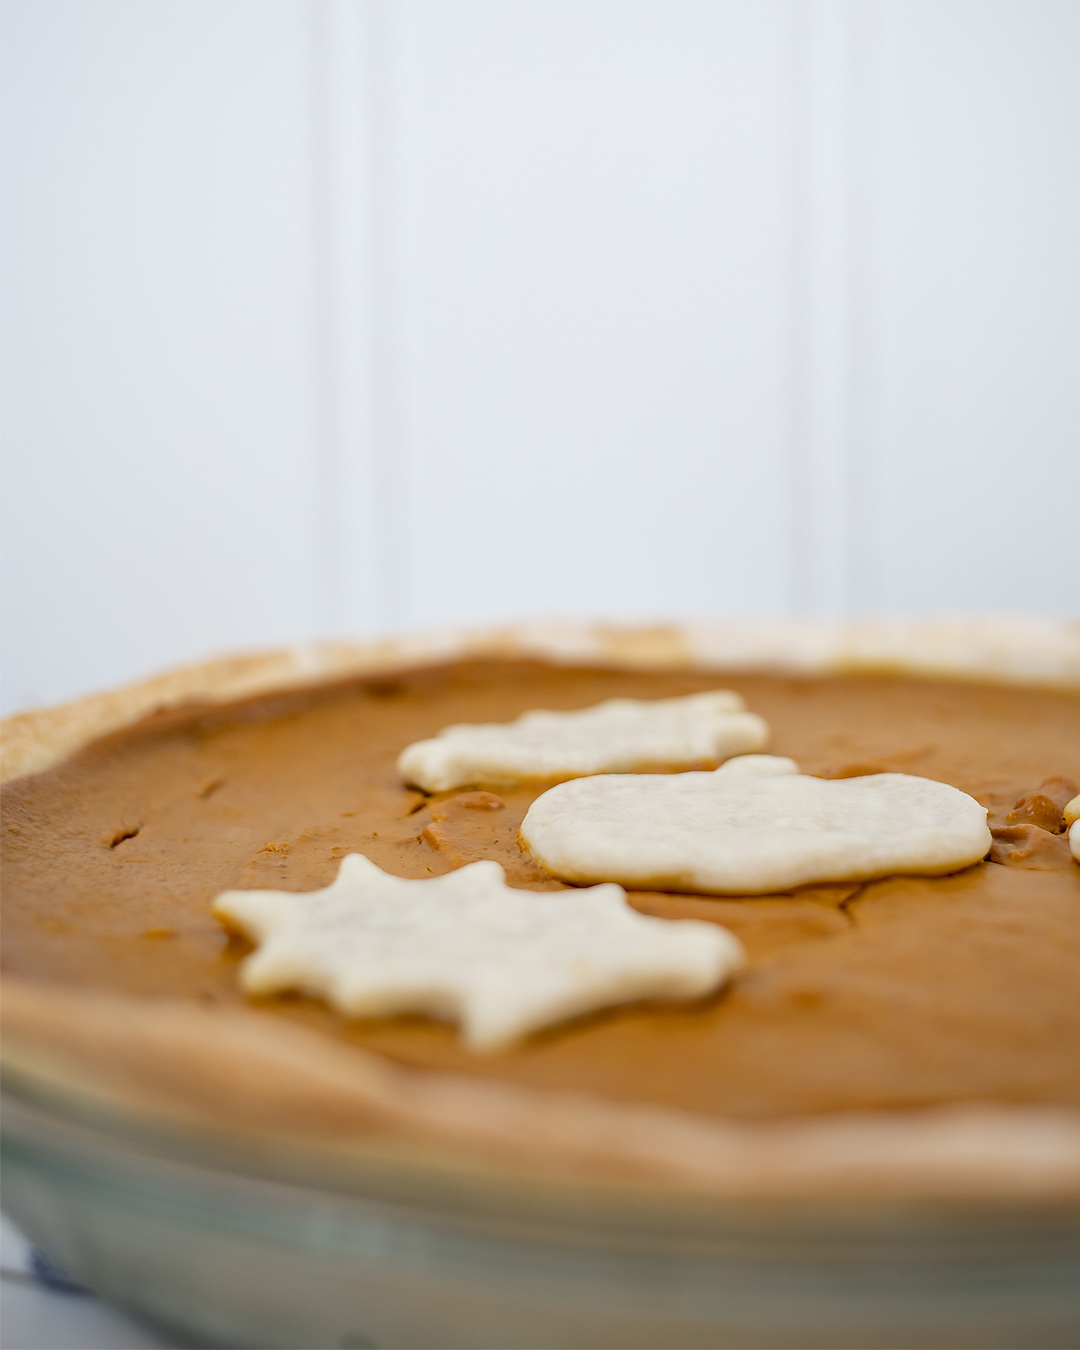 Pumpkin pie is a fall necessity and no one should do without! Here's my recipe for perfect plant-based pumpkin pie.